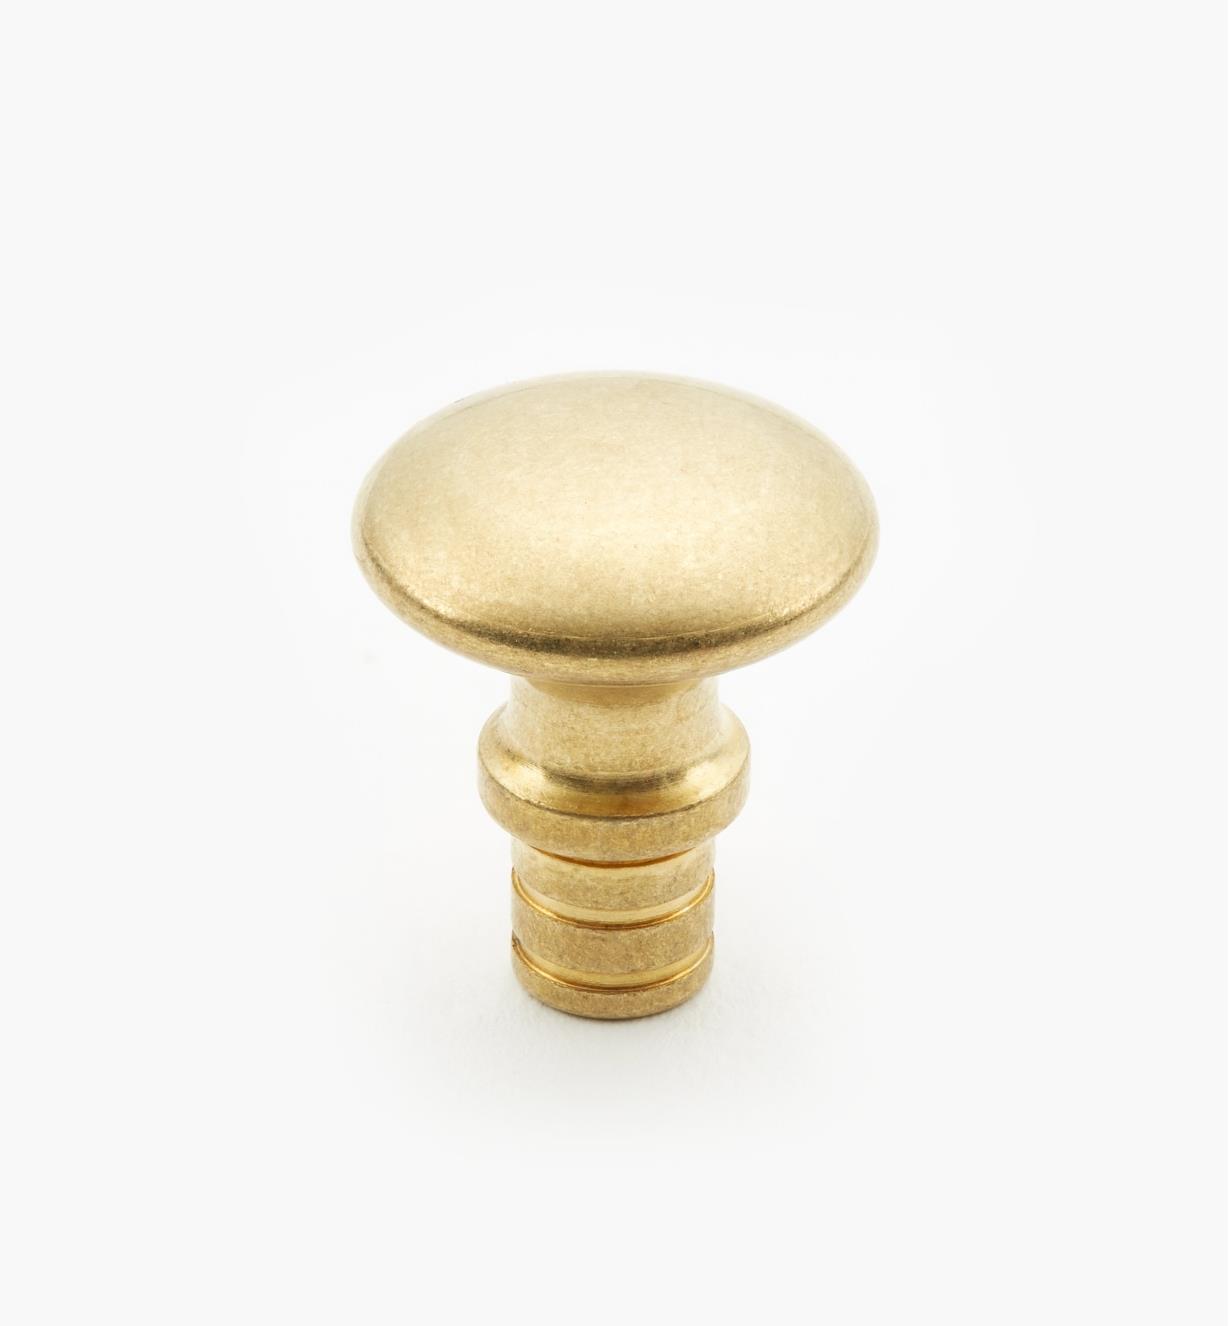 05H2206 - 5/8" x 7/16" Lee Valley Small Turned Brass Knob (3/4")